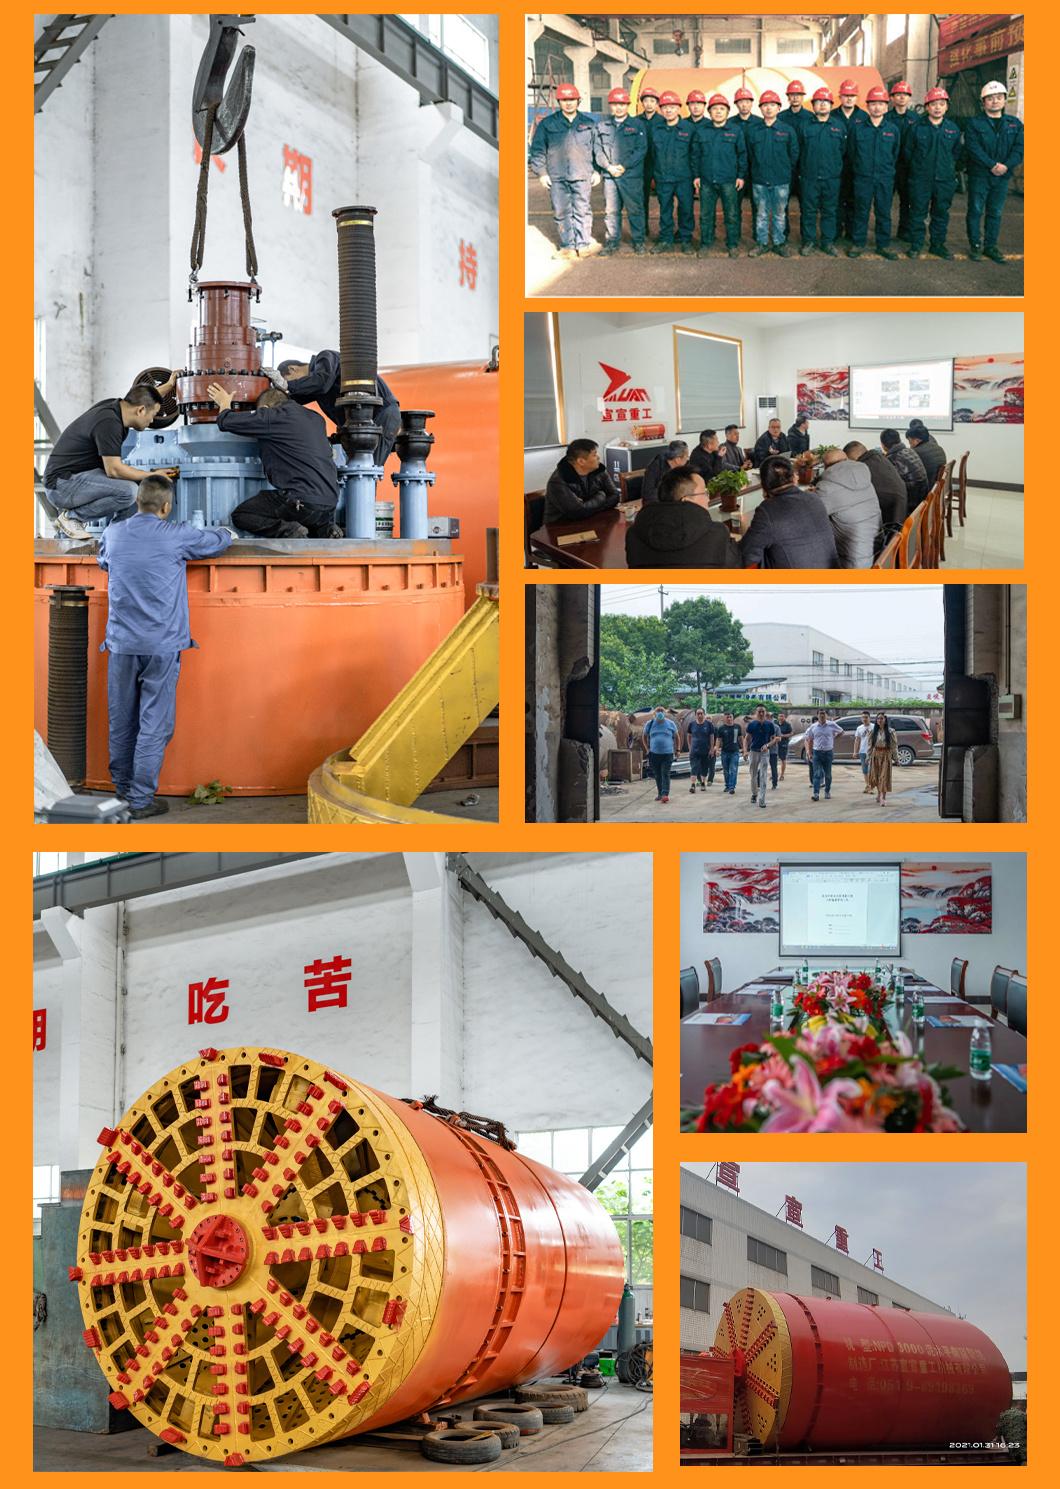 Roller Disc Cutters Rock Drilling Hard Rock Pipe Jacking Tunnel Boring Micro Tunneling Machine